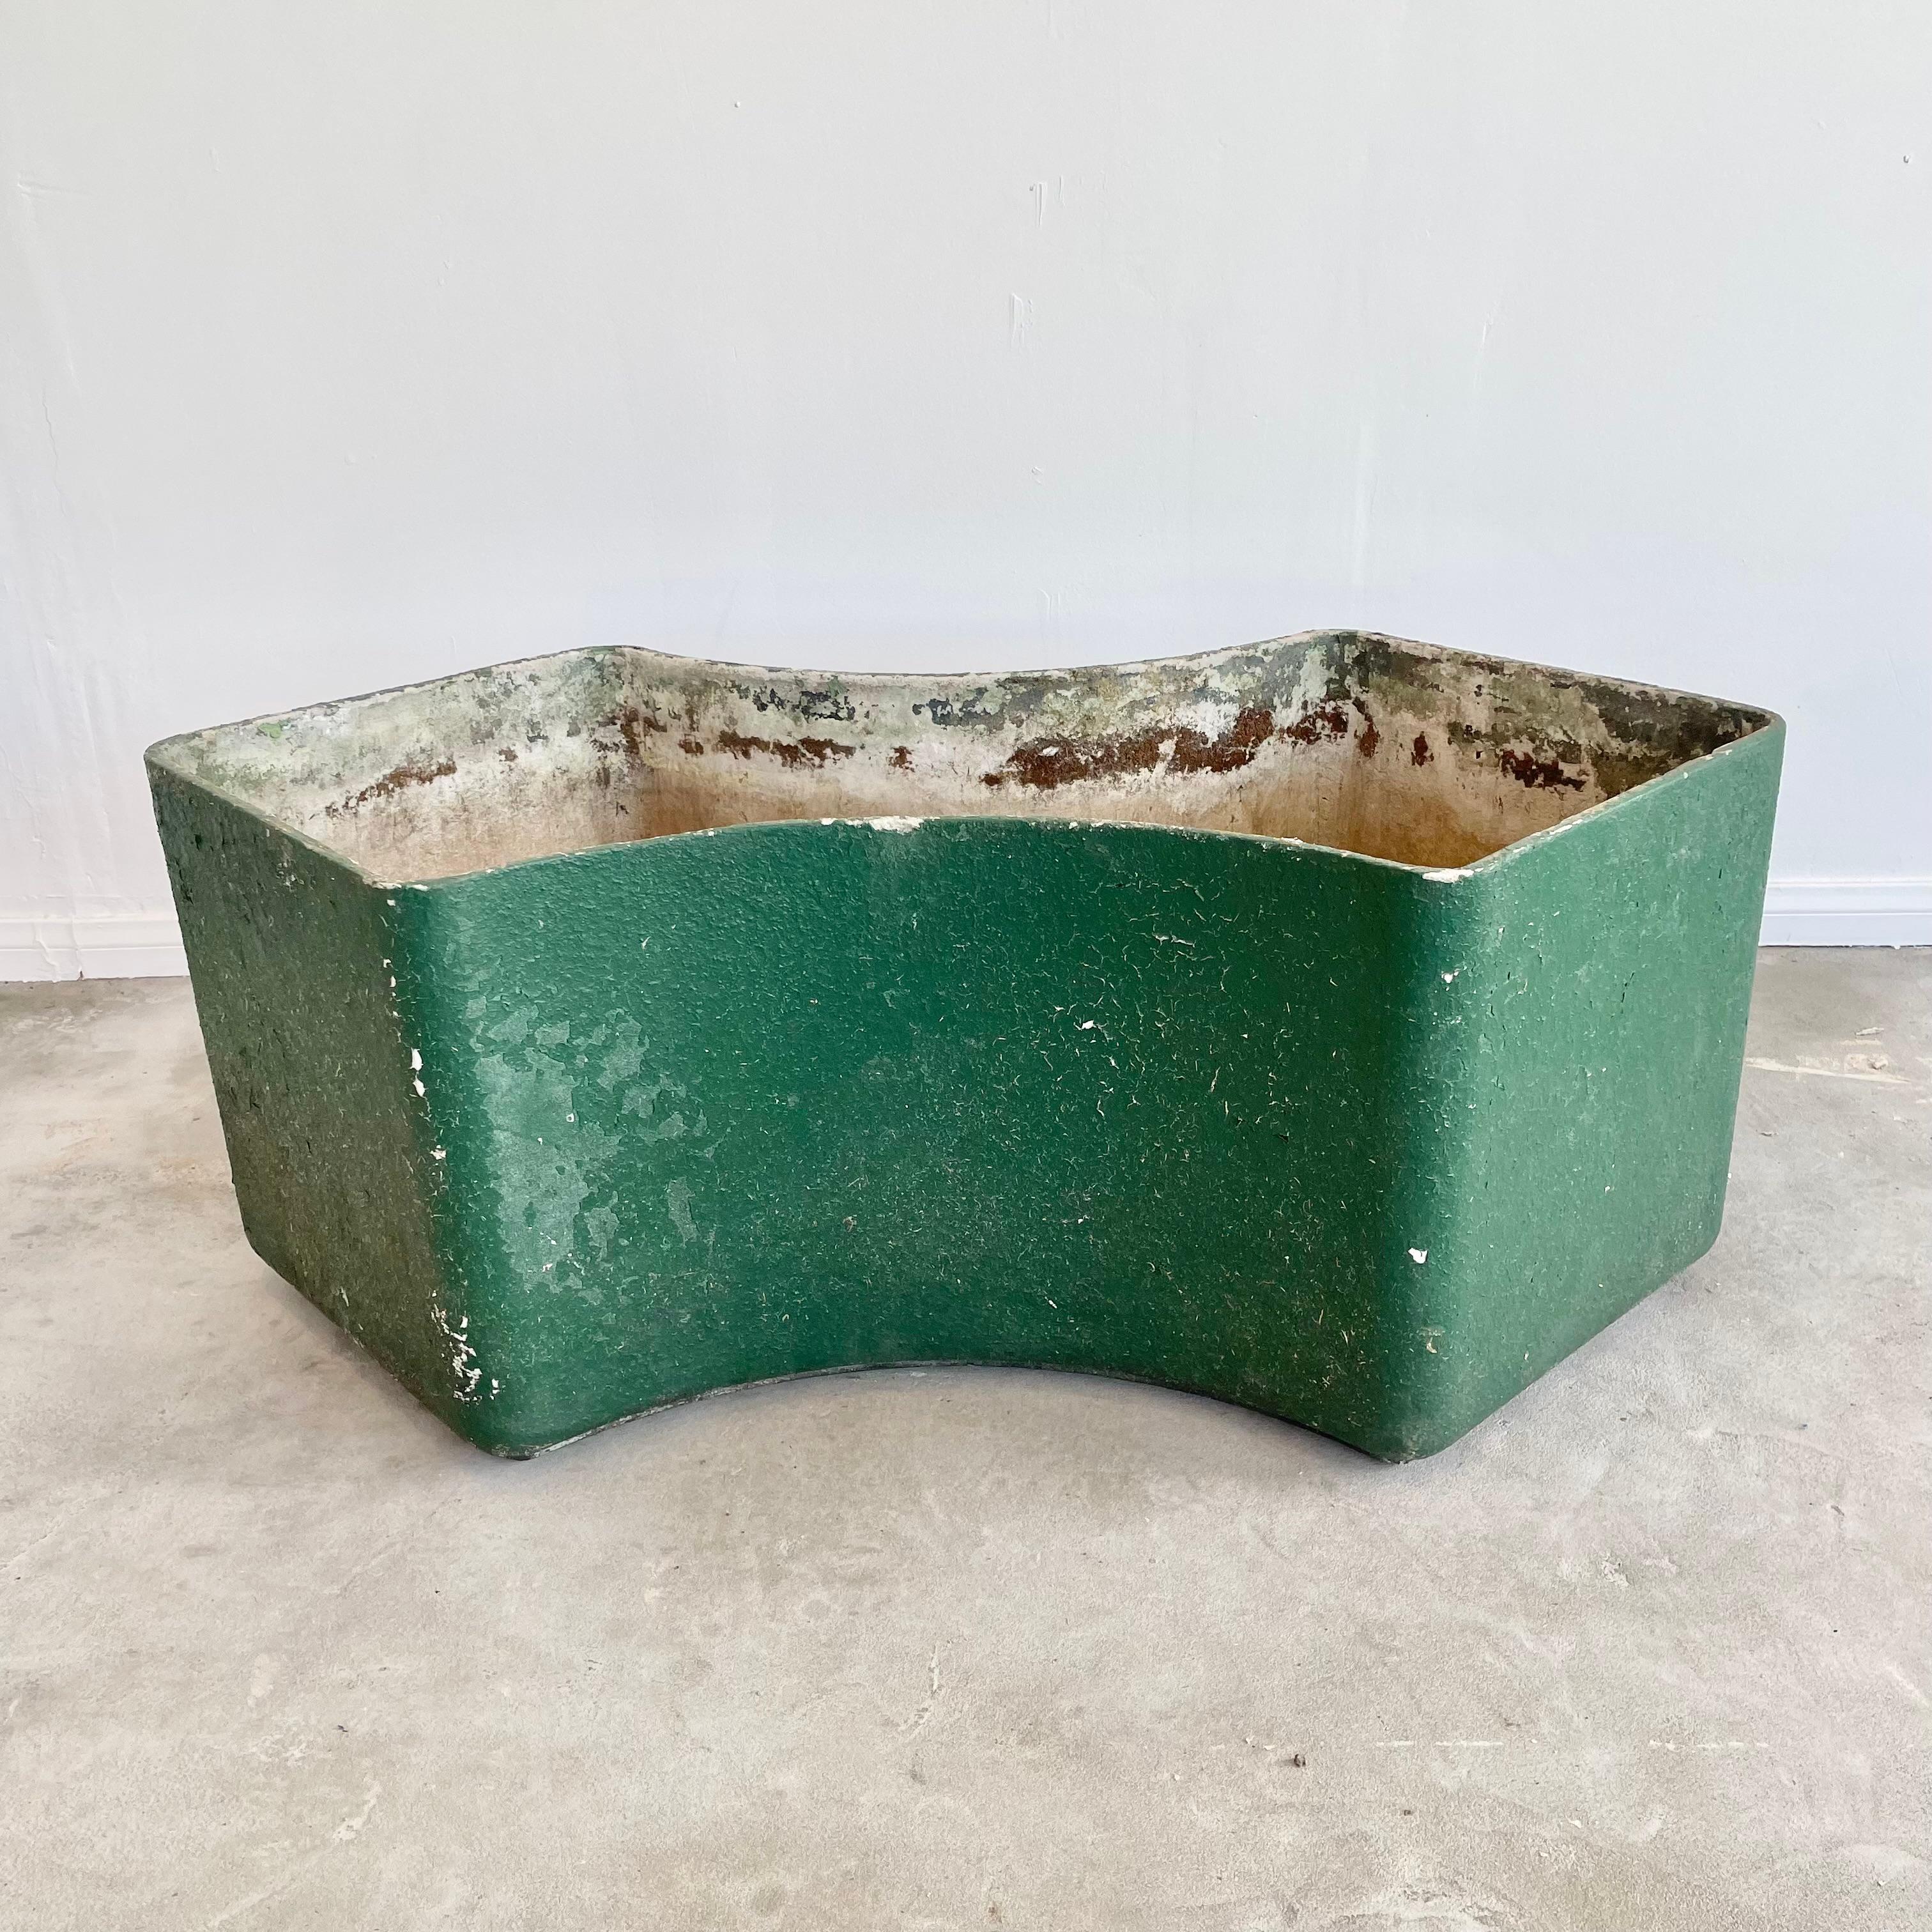 Oversized concrete trough planter by Swiss architect Willy Guhl. Stunning presence and design. Stretching an impressive 39